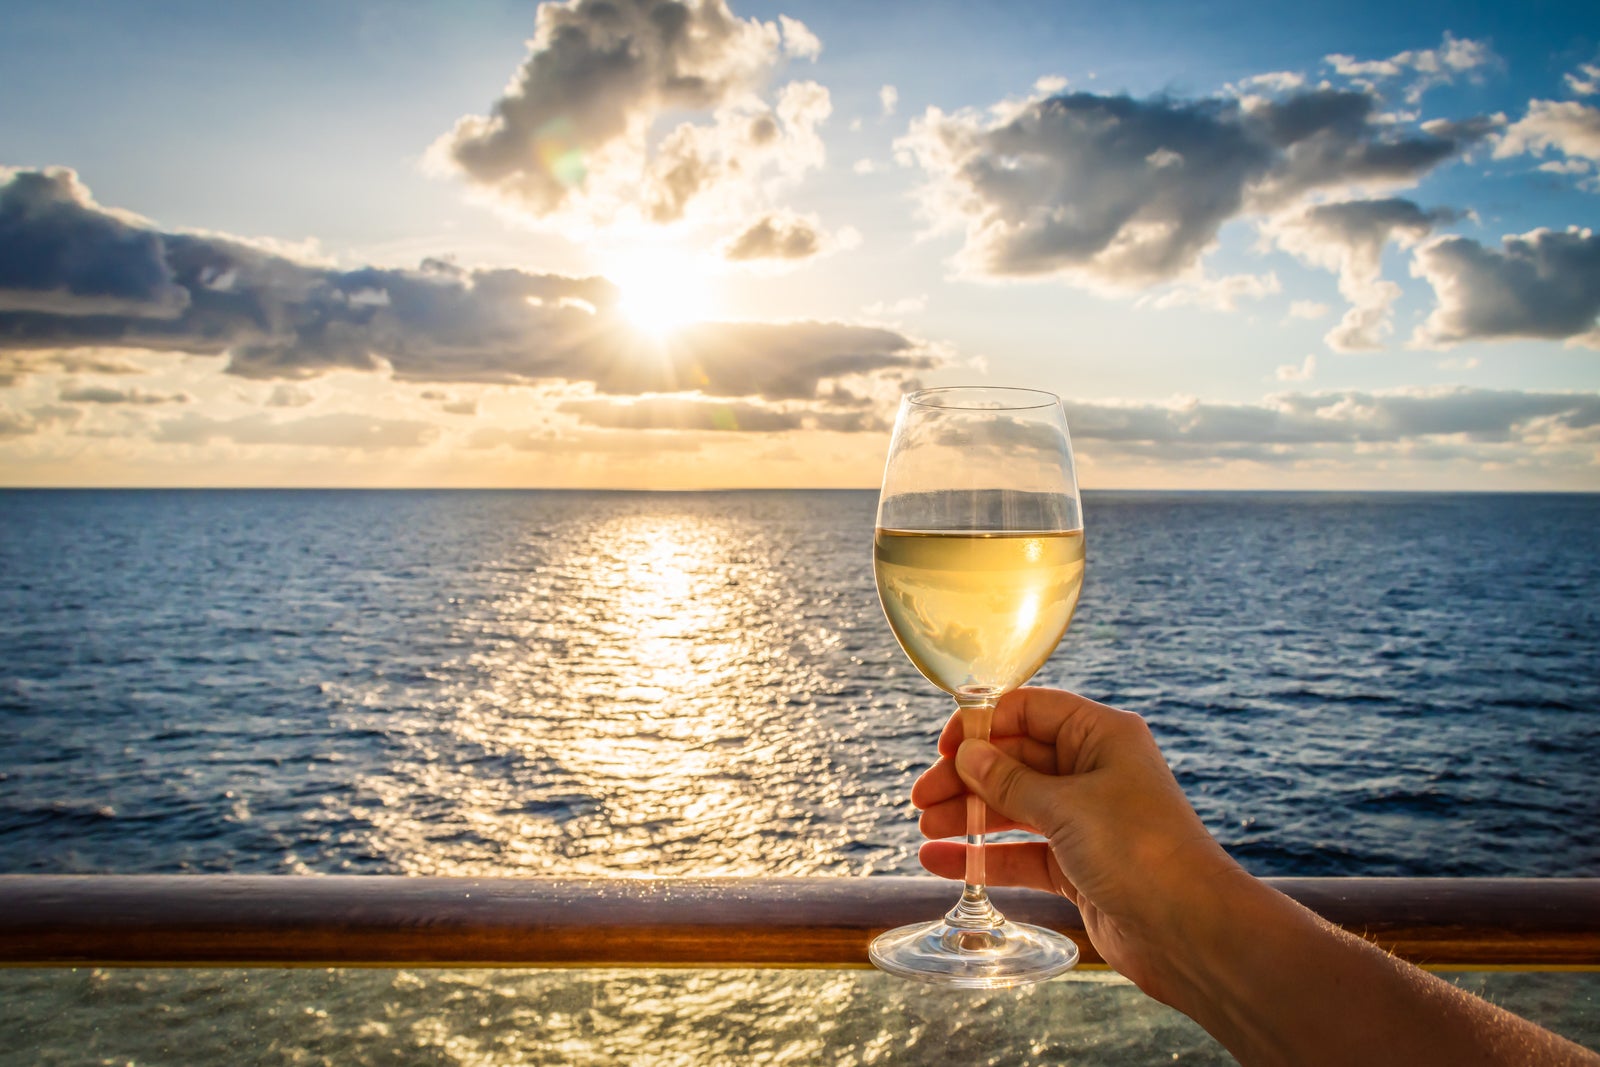 A glass of white wine in a female hand at sunset on cruise vacation.